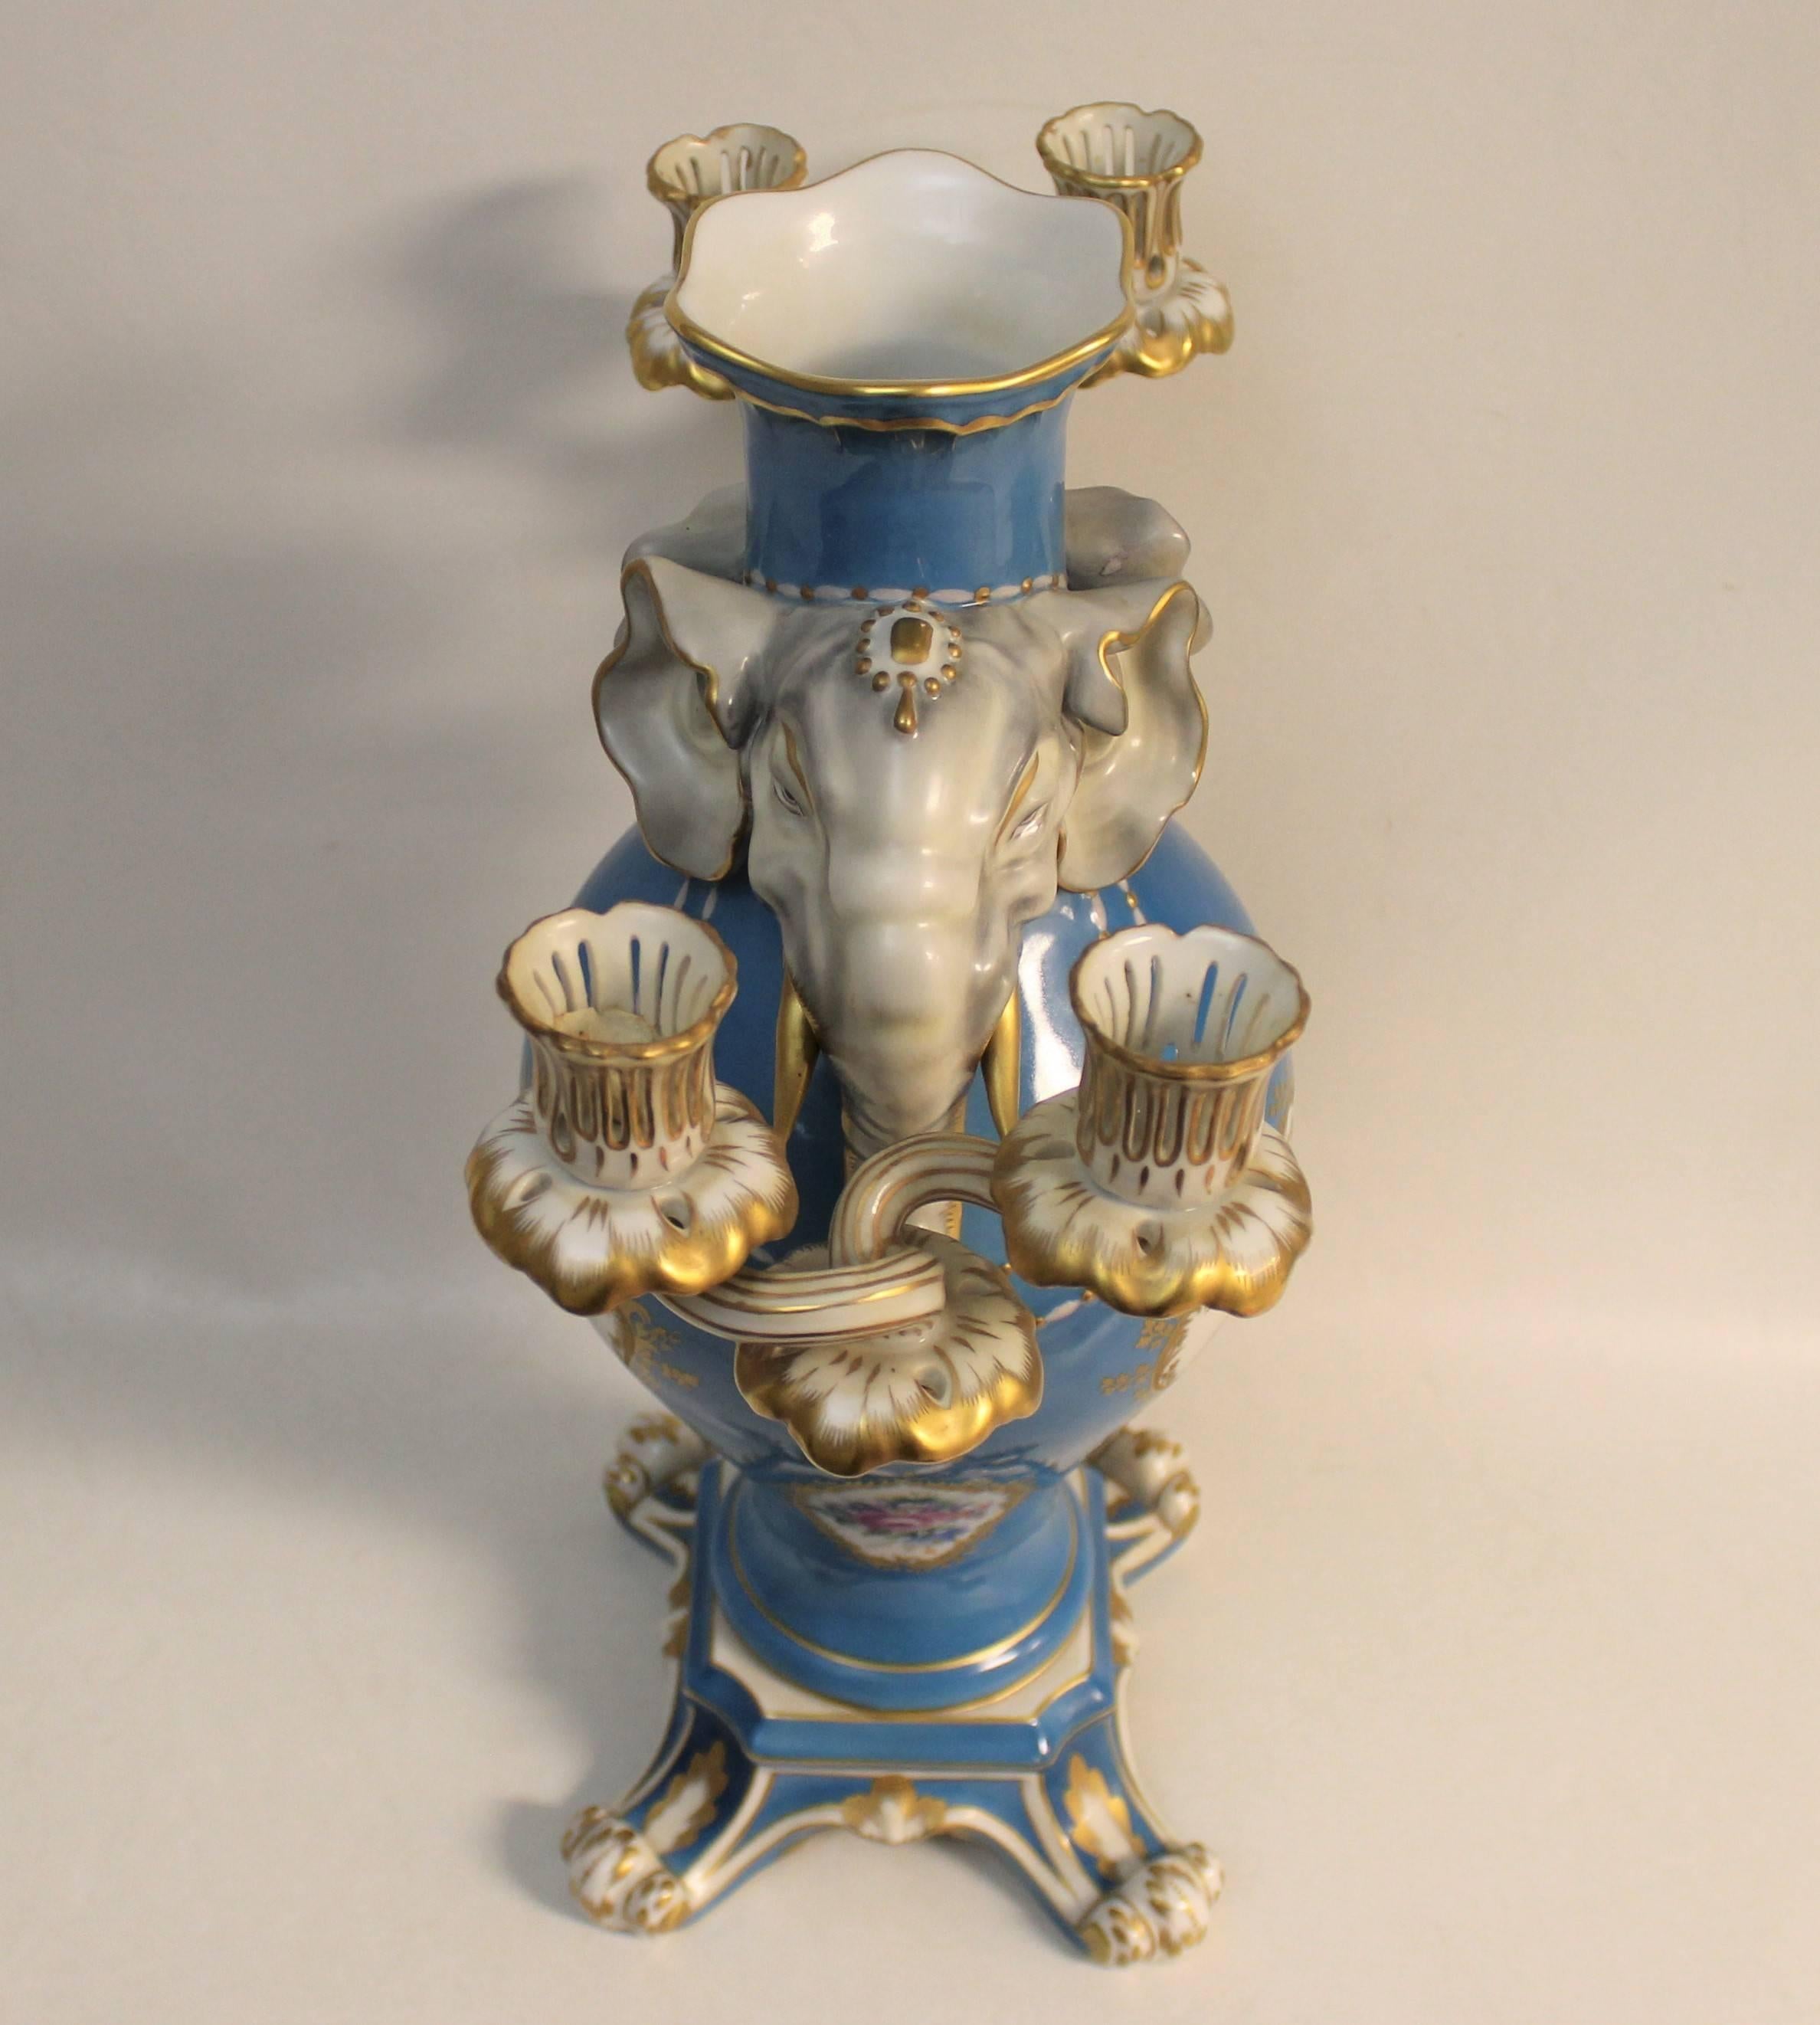 Herend Porcelain Candelabra Centrepiece In Good Condition For Sale In Hamilton, Ontario